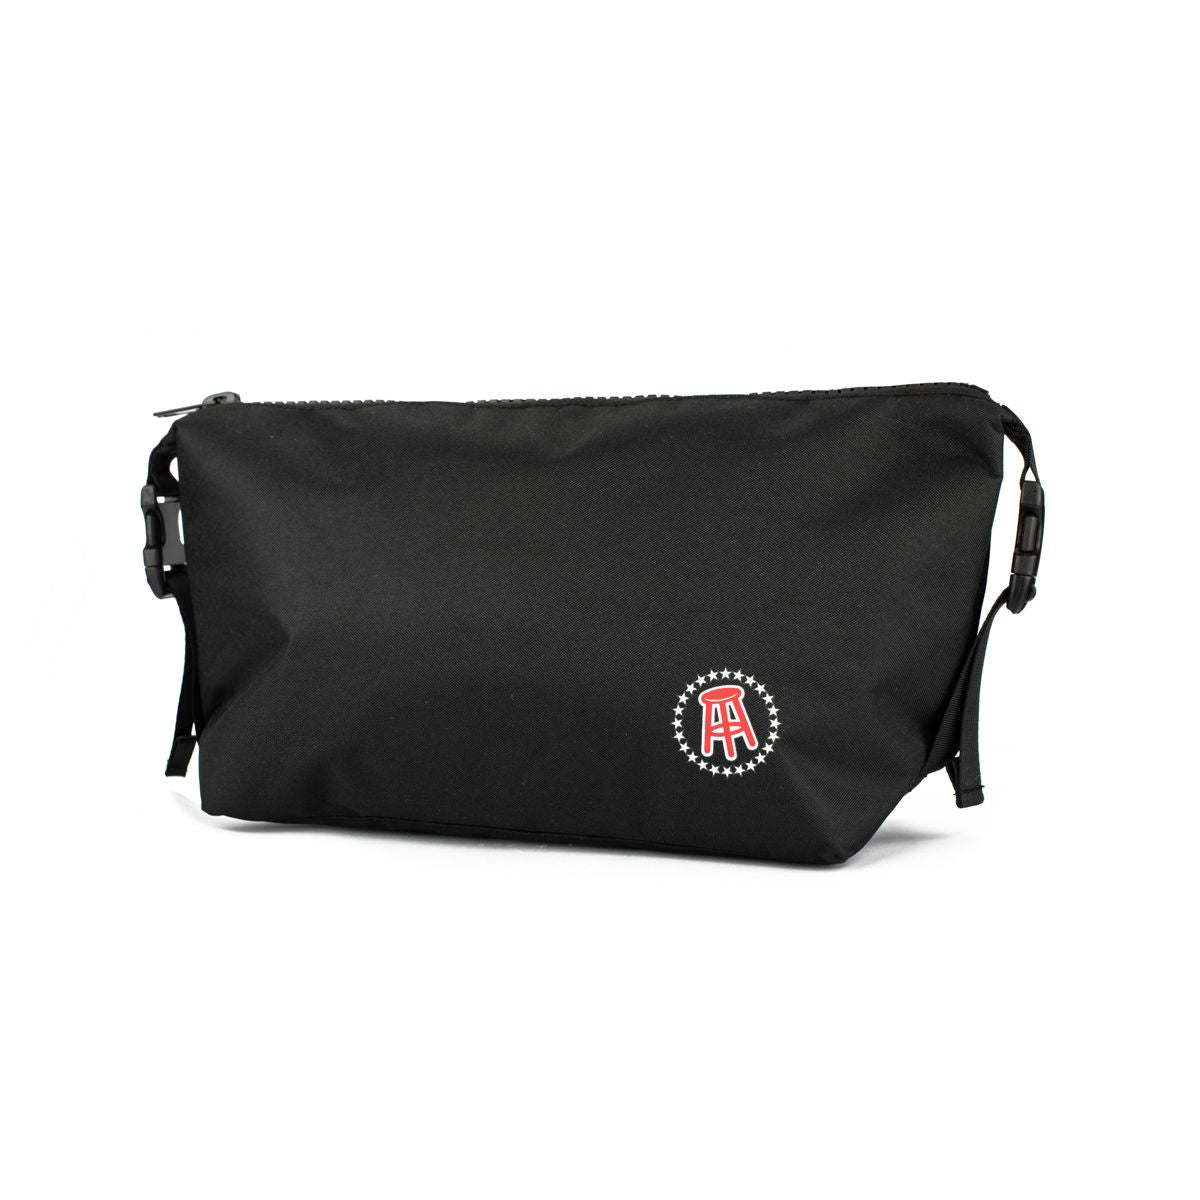 Barstool Sports Toiletry Bag-Golf Accessories-Barstool Sports-Black-Barstool Sports